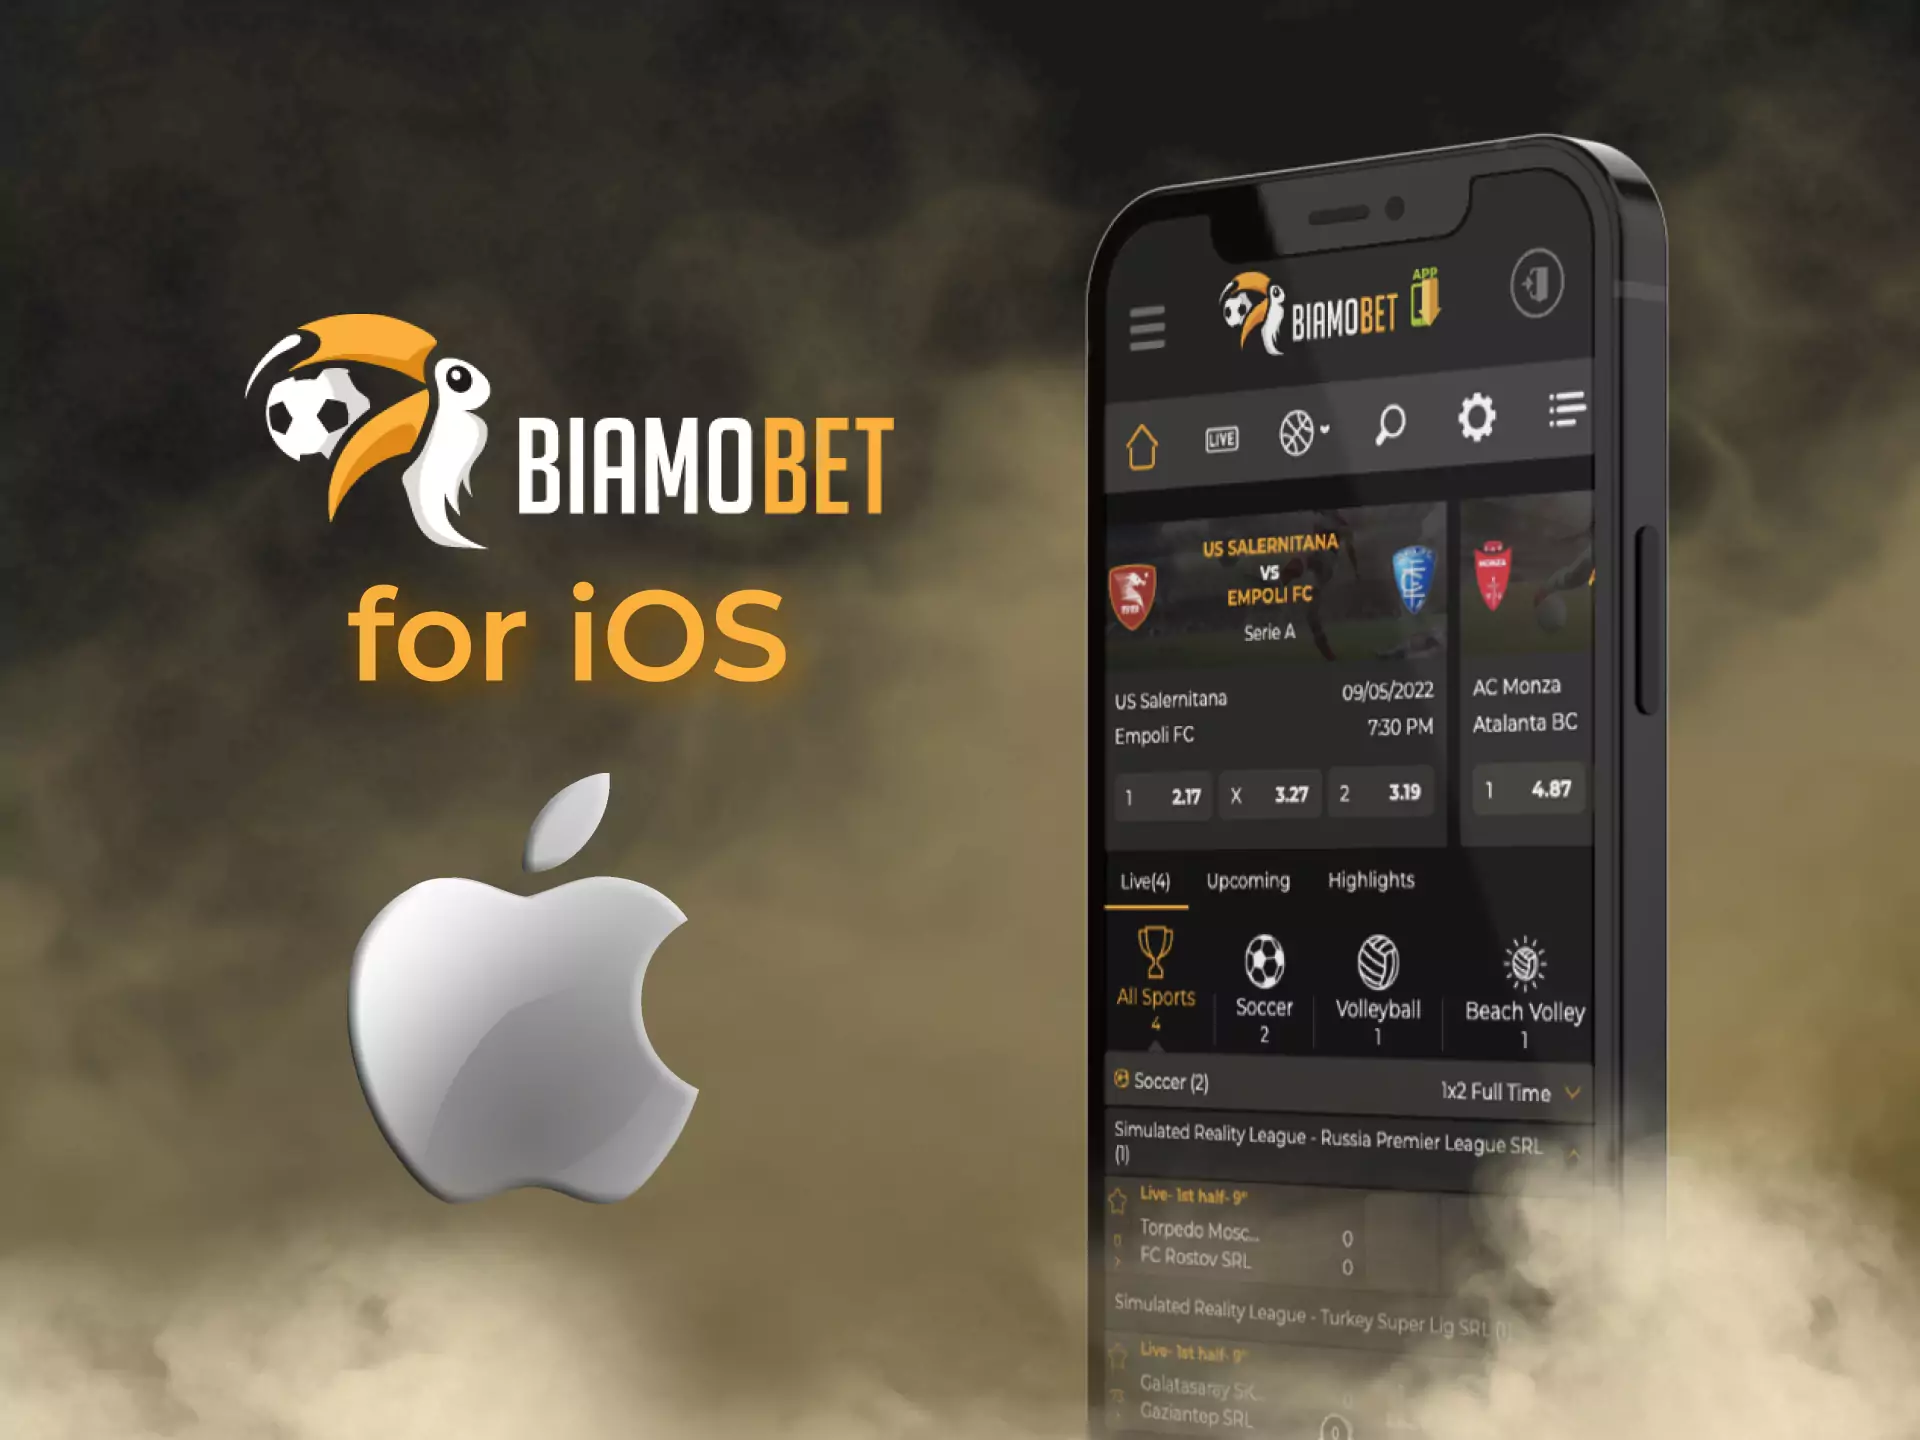 On iOS devices, you can enjoy the features of Biamobet as well as Android device owners.